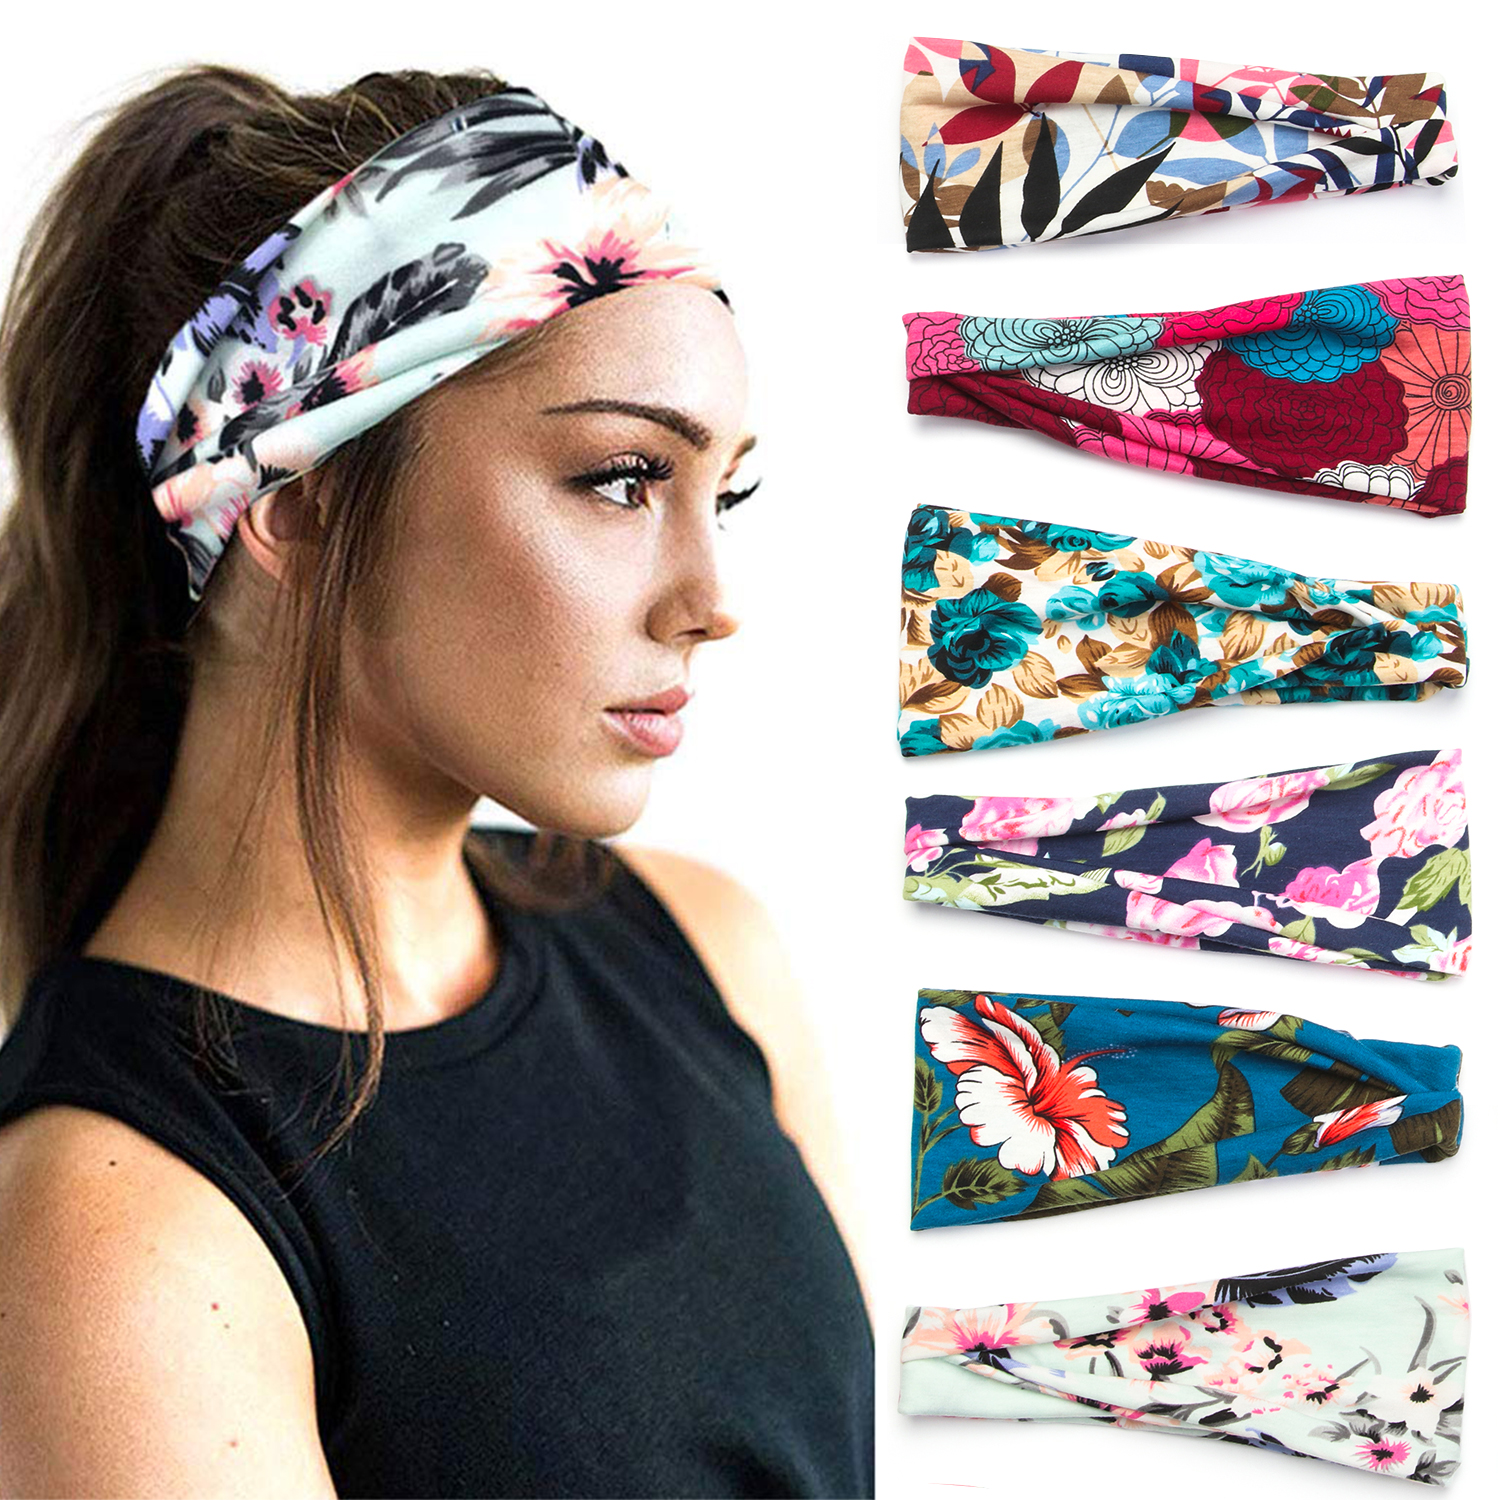 GVGSX9N Fashion Exercise Yoga Stretchy Workout Headbands for Women Sweat Headband Sweat Wicking Hair Bands Solid Headbands